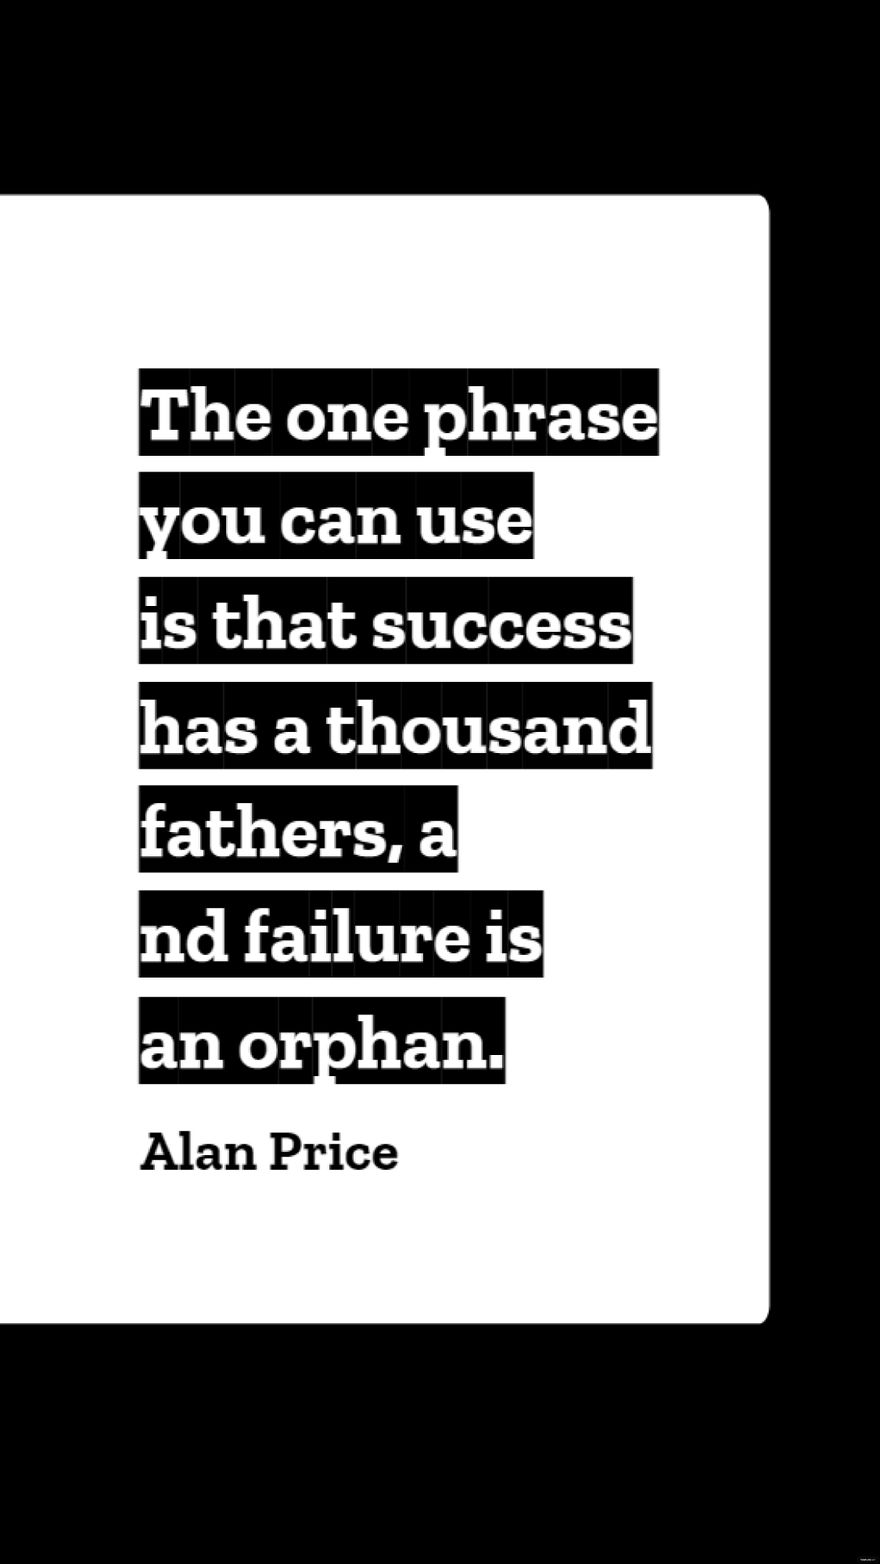 Free Alan Price - The one phrase you can use is that success has a thousand fathers, and failure is an orphan. in JPG